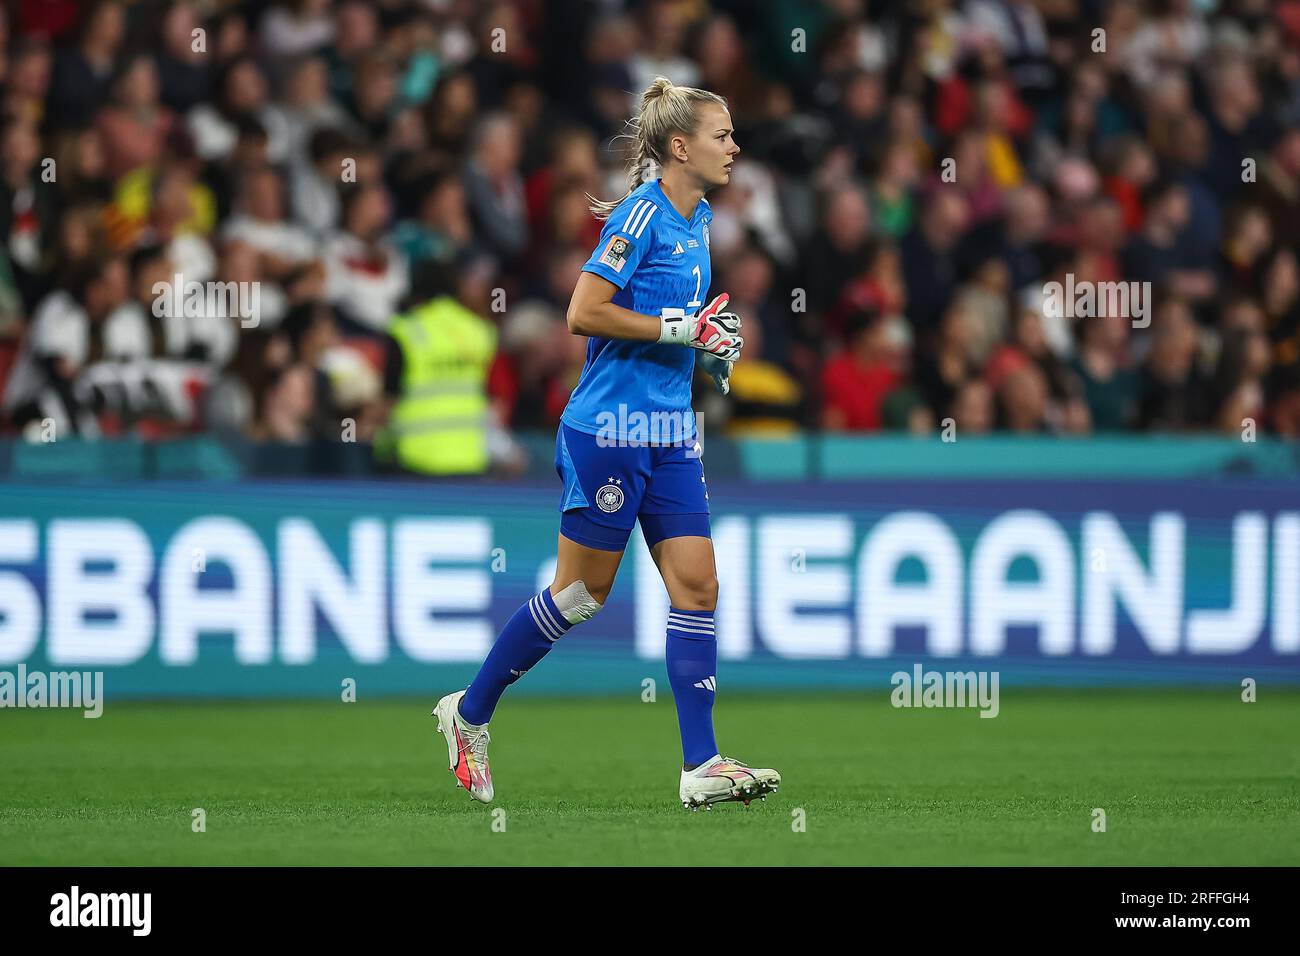 Merle Frohms #1 of Germany during the FIFA Women's World Cup 2023 Group H match South Korea vs Germany Women at Suncorp Stadium, Brisbane, Australia, 3rd August 2023 (Photo by Patrick Hoelscher/News Images) in, on 8/3/2023. (Photo by Patrick Hoelscher/News Images/Sipa USA) Credit: Sipa USA/Alamy Live News Stock Photo